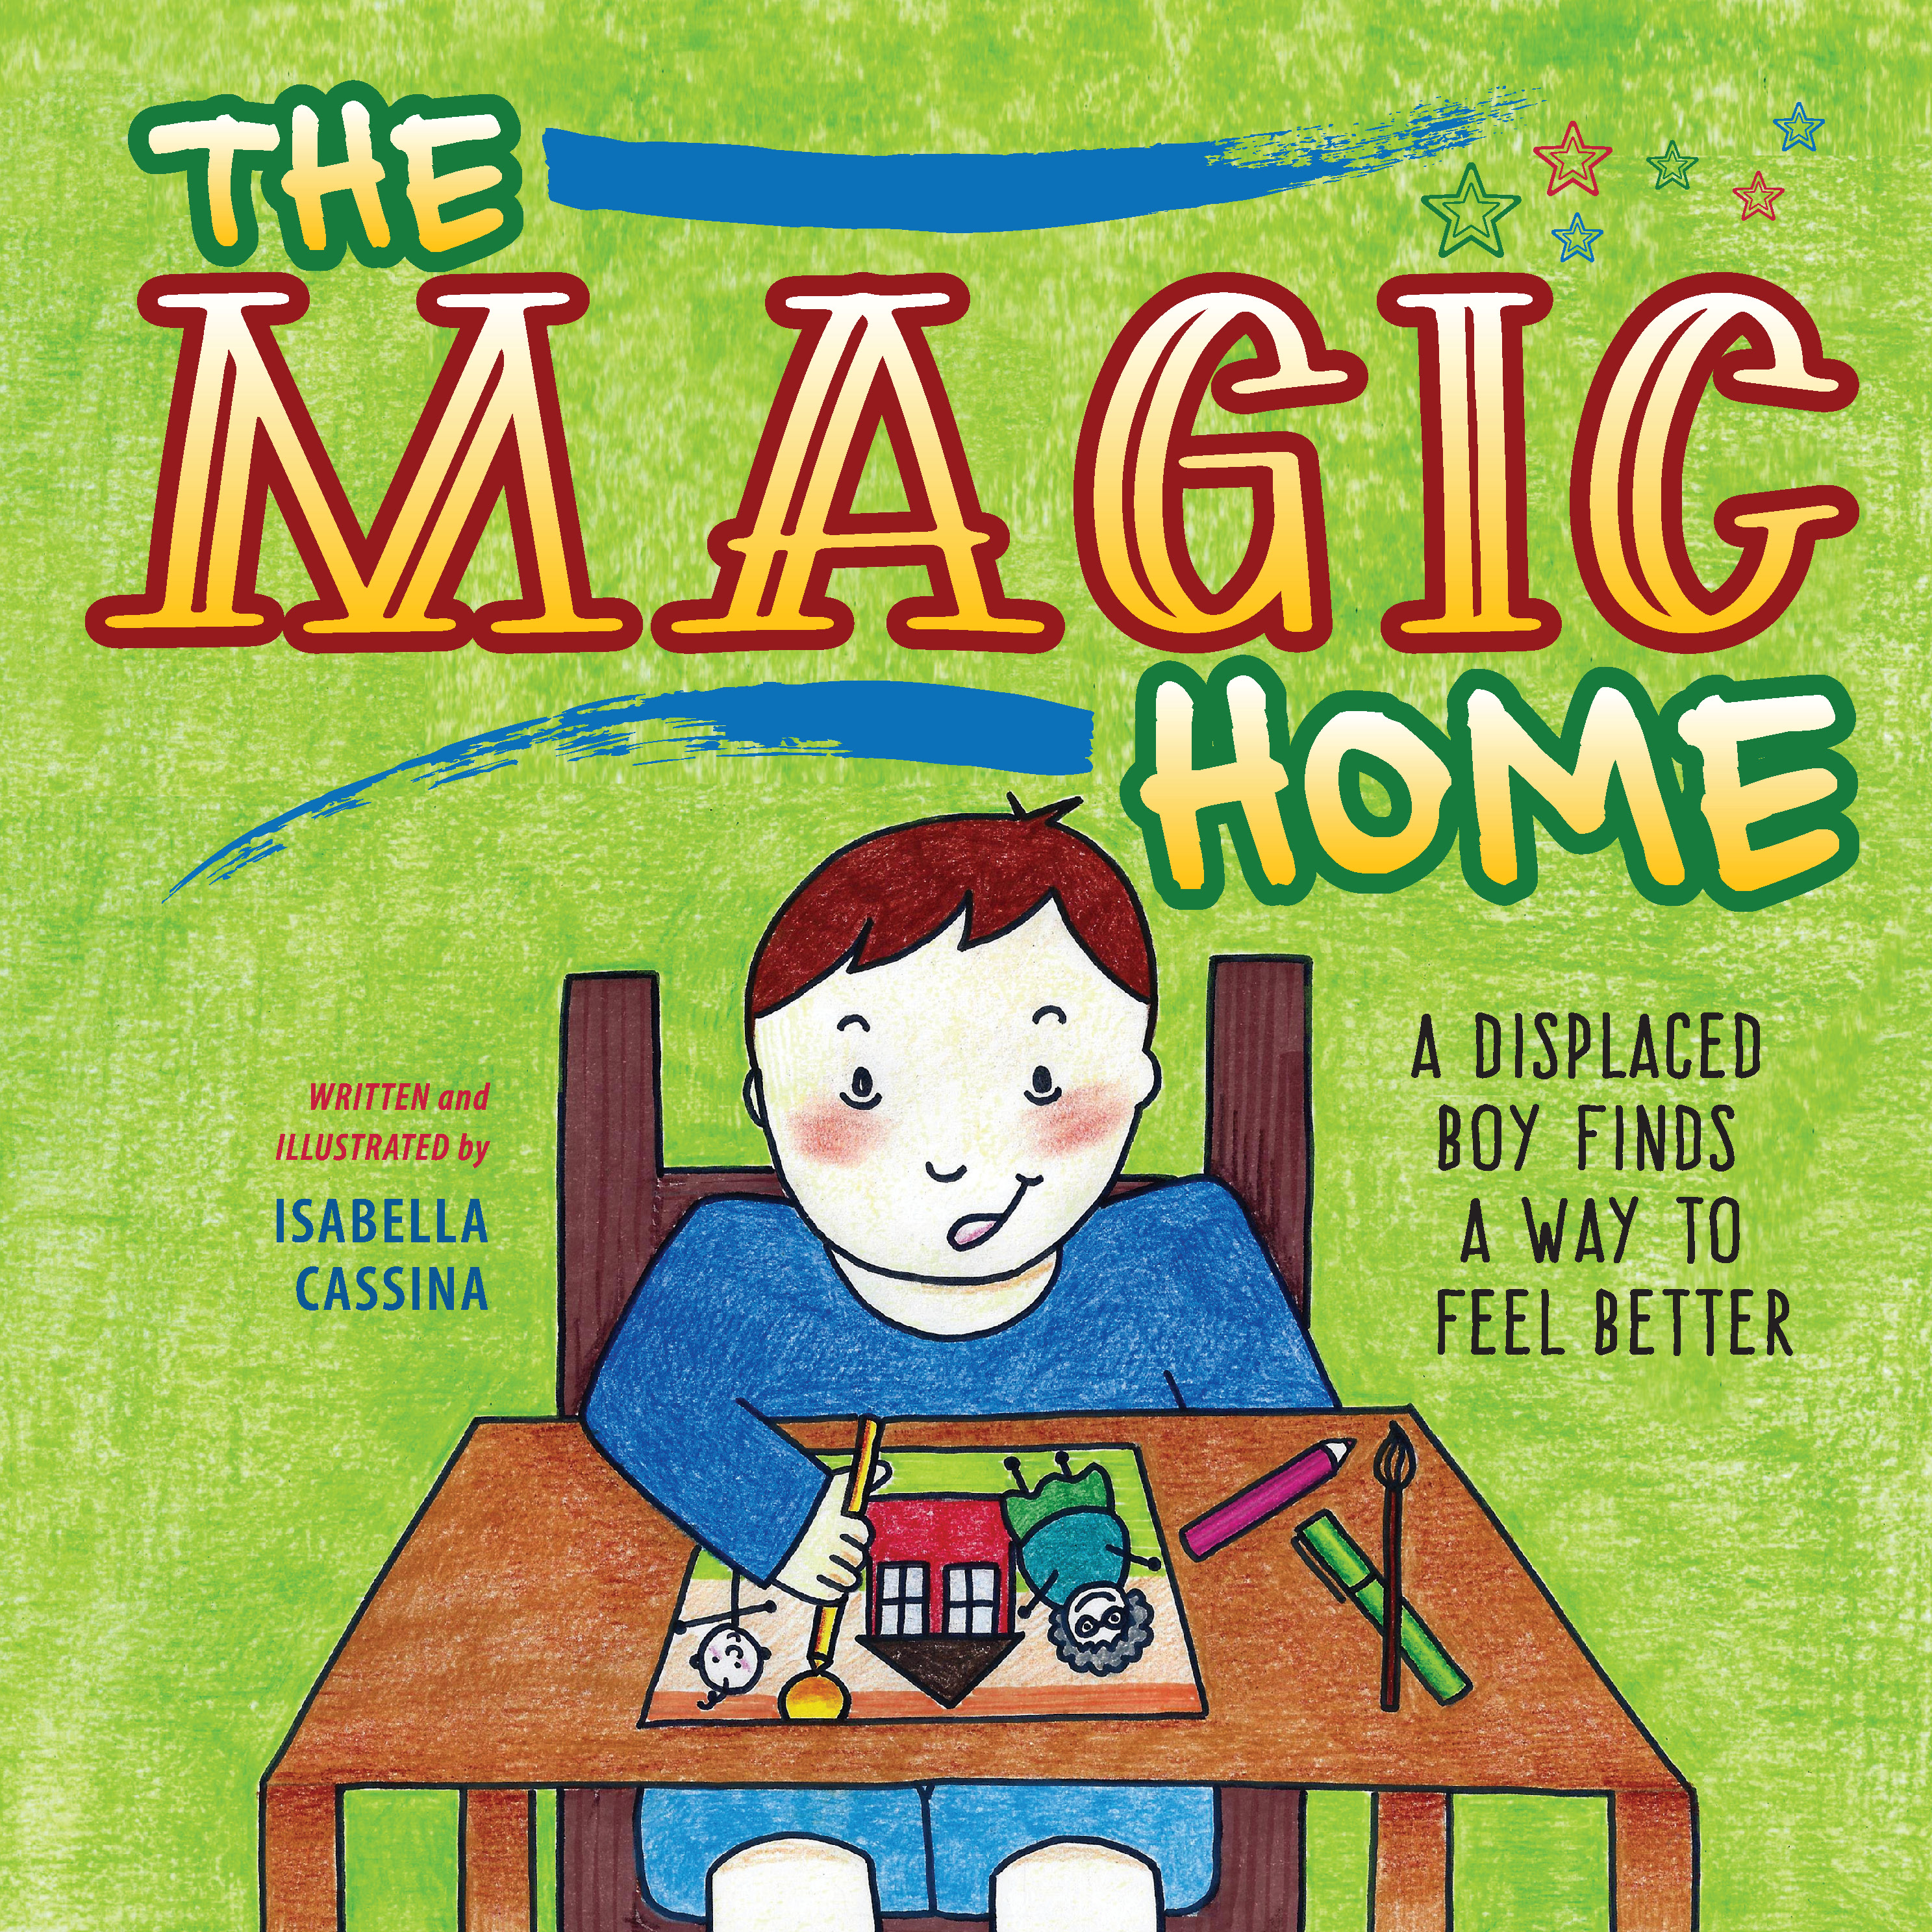 The Magic Home by Isabella Cassina